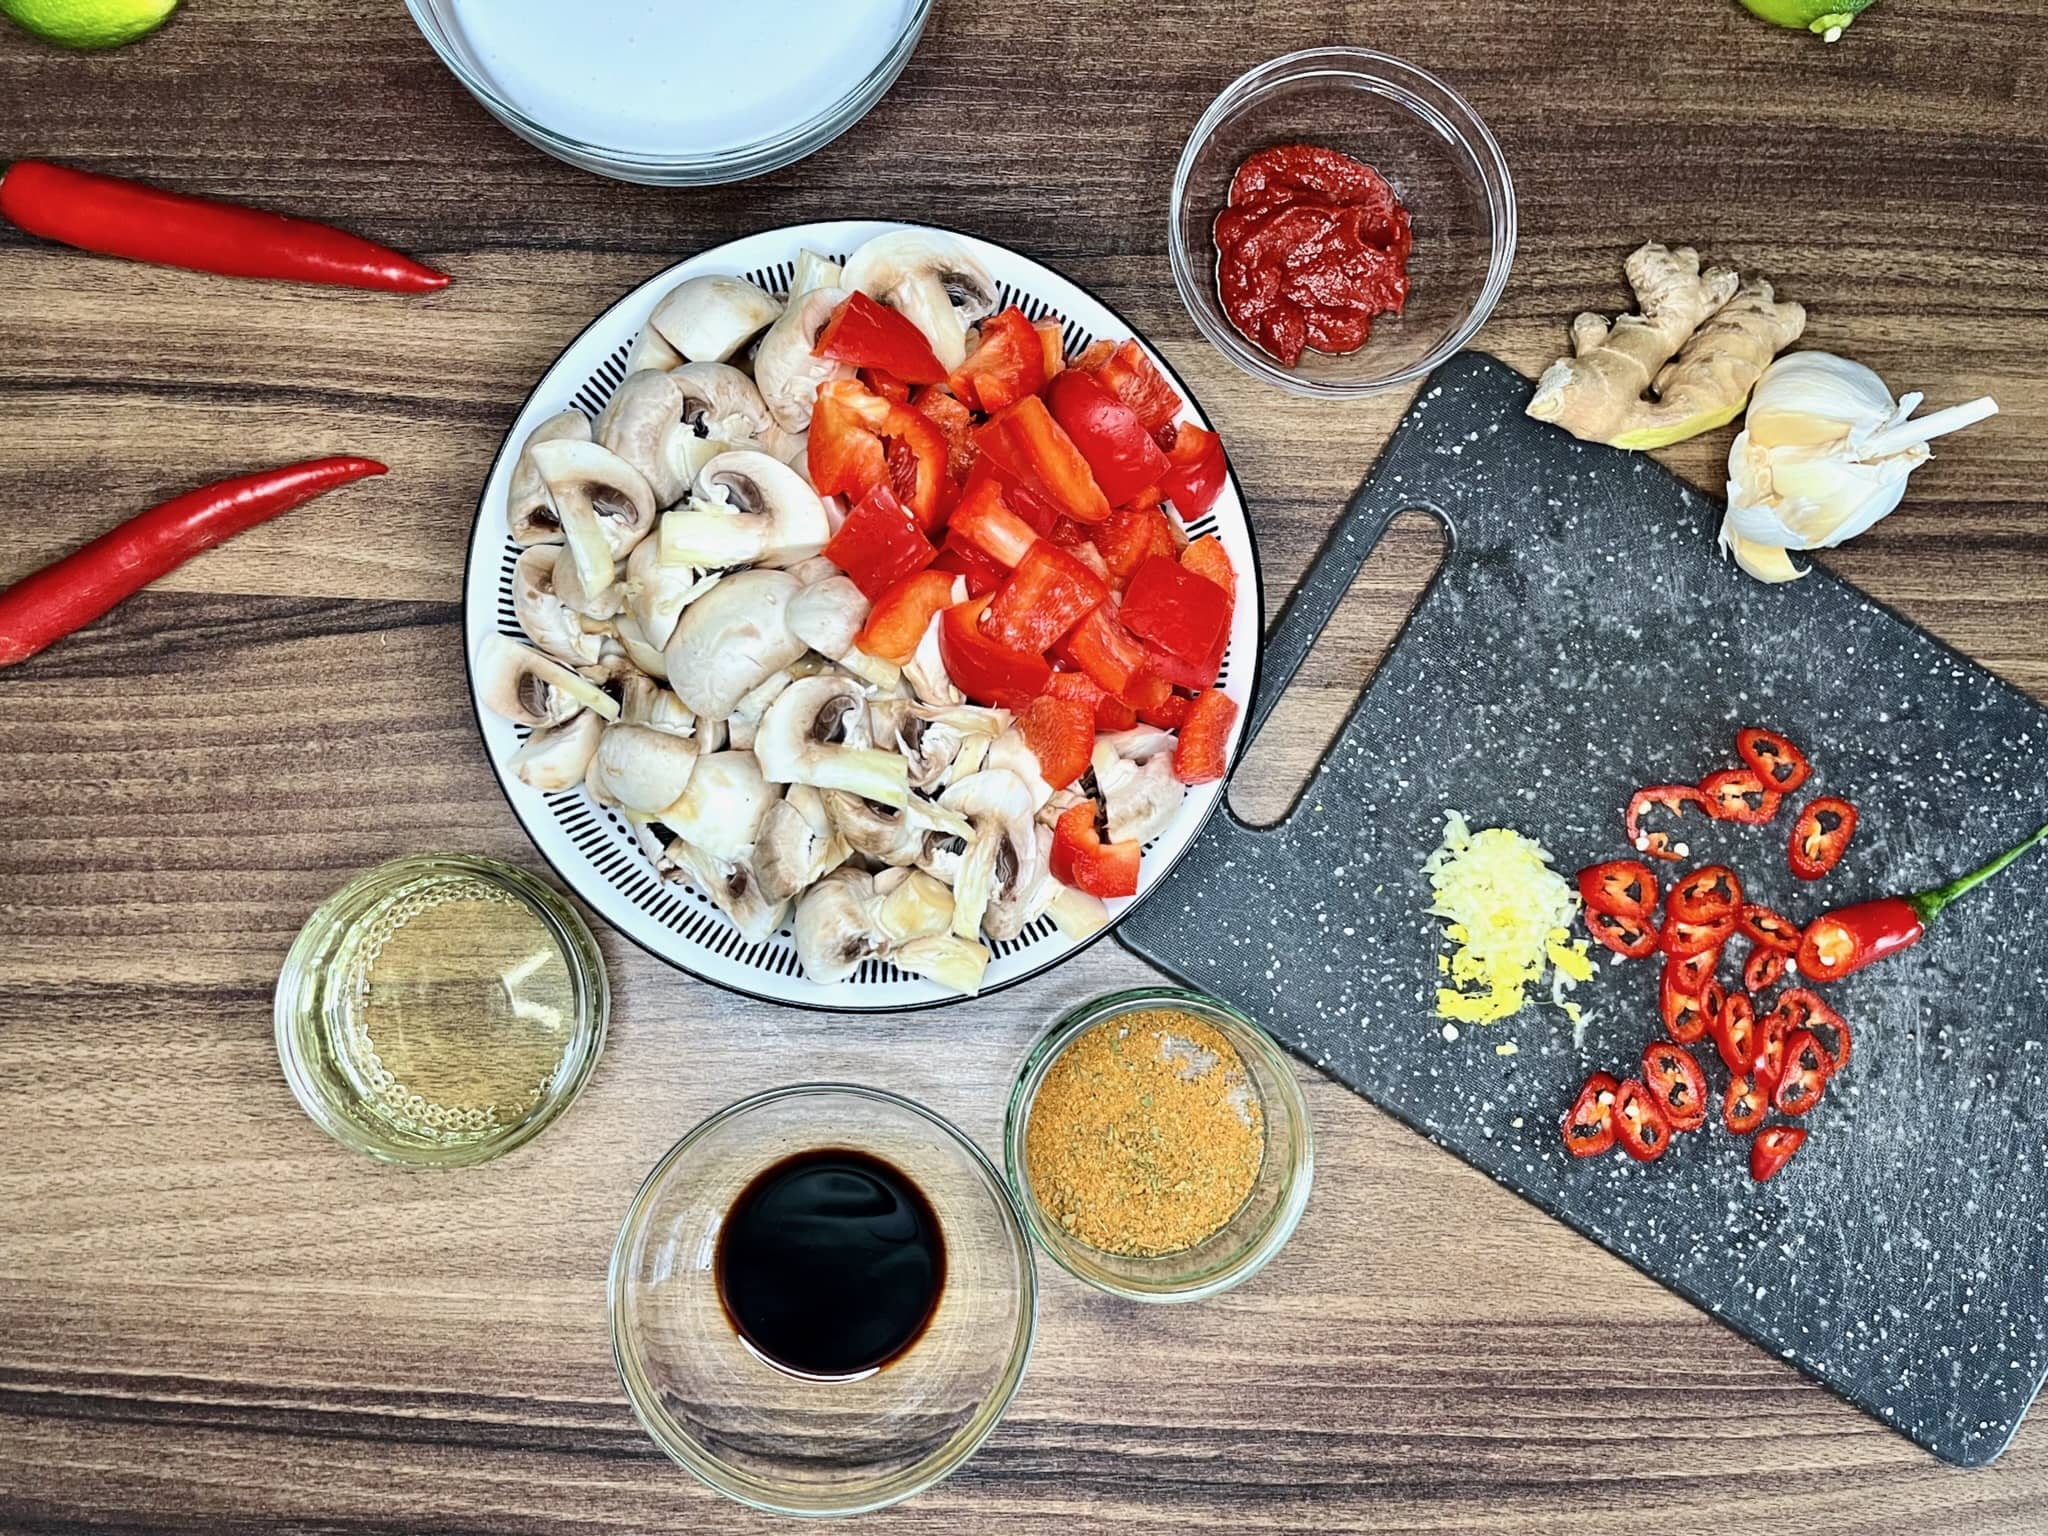 The carefully prepared ingredients are arranged on the table, ready to make Veggie Thai Curry with Udon Noodles